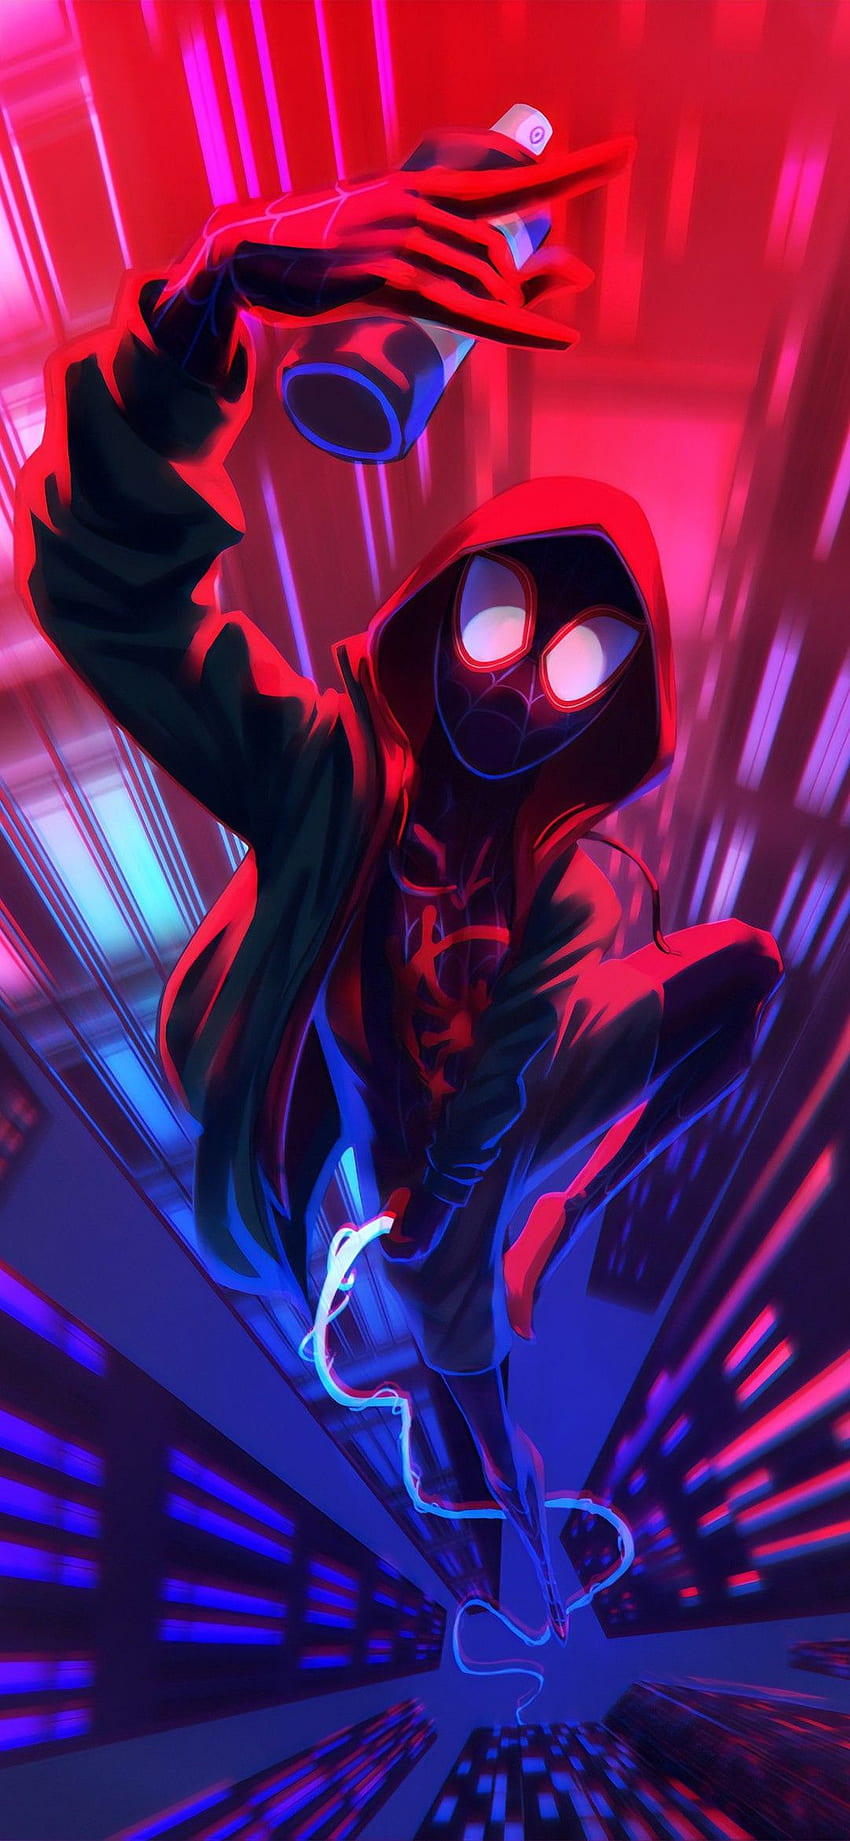 100+] Miles Morales Iphone Wallpapers | Wallpapers.com